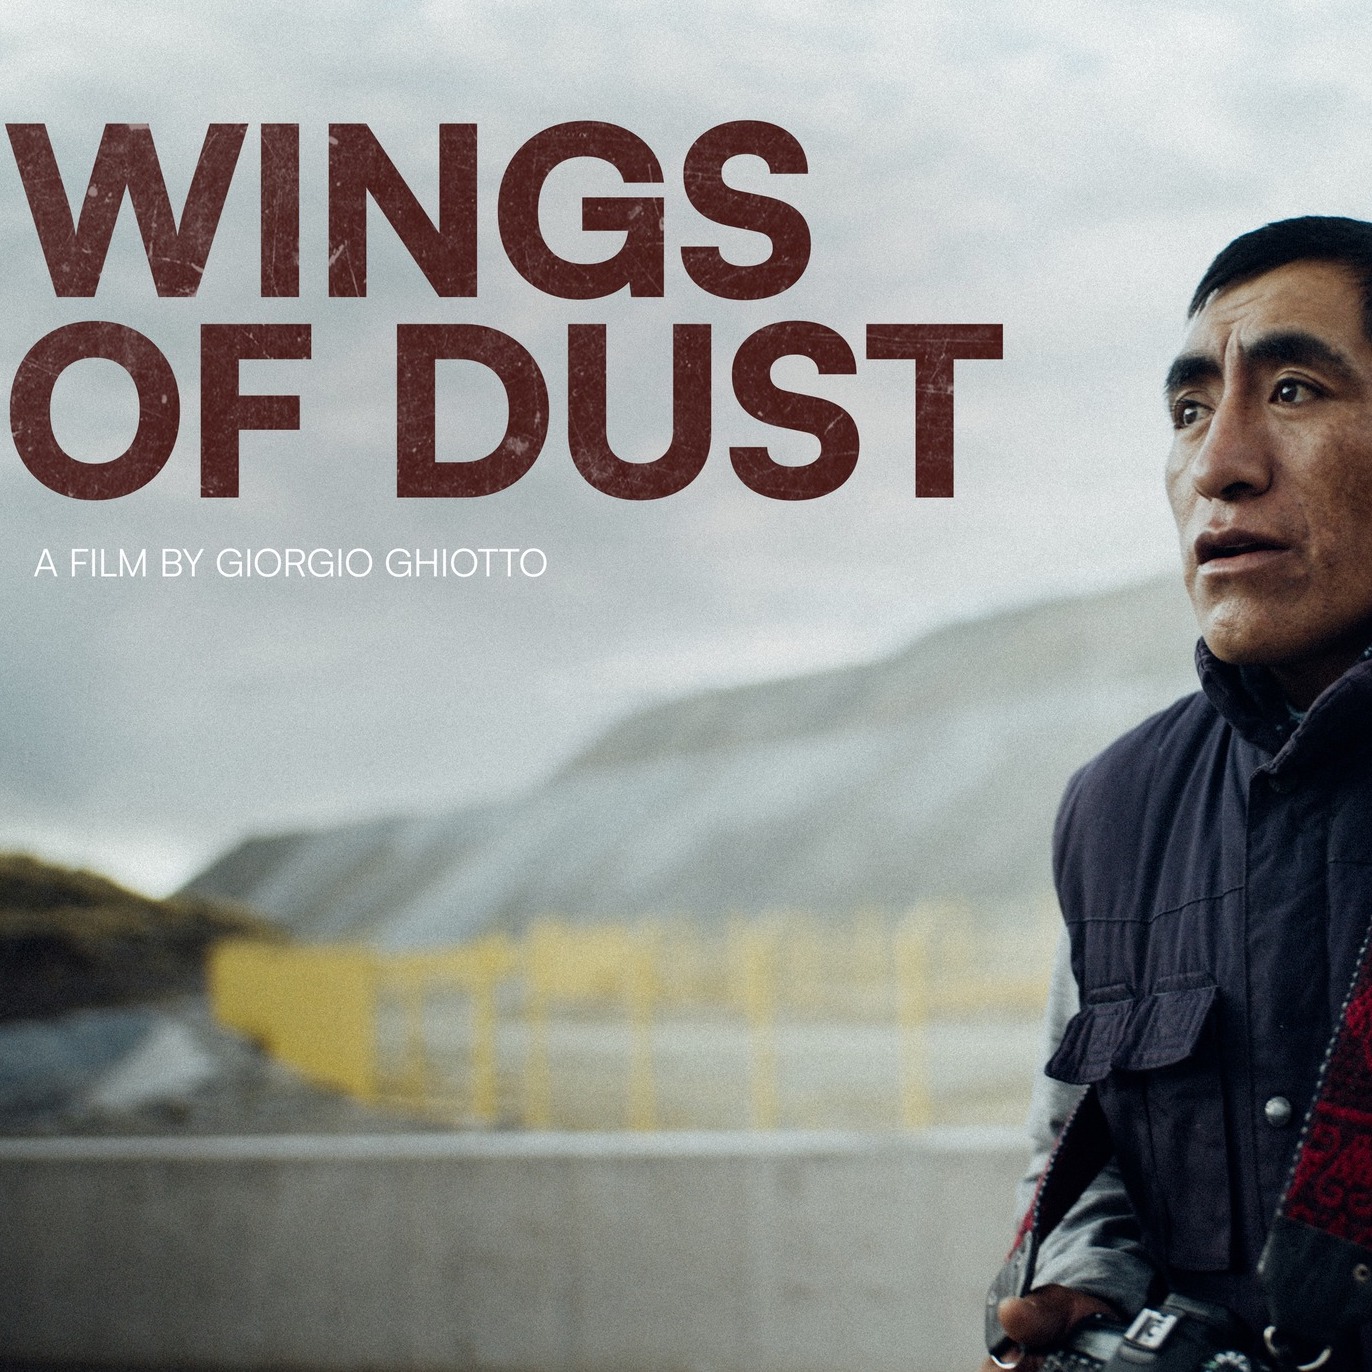 Wings of dust poster, square. Reads: "Wings of Dust"